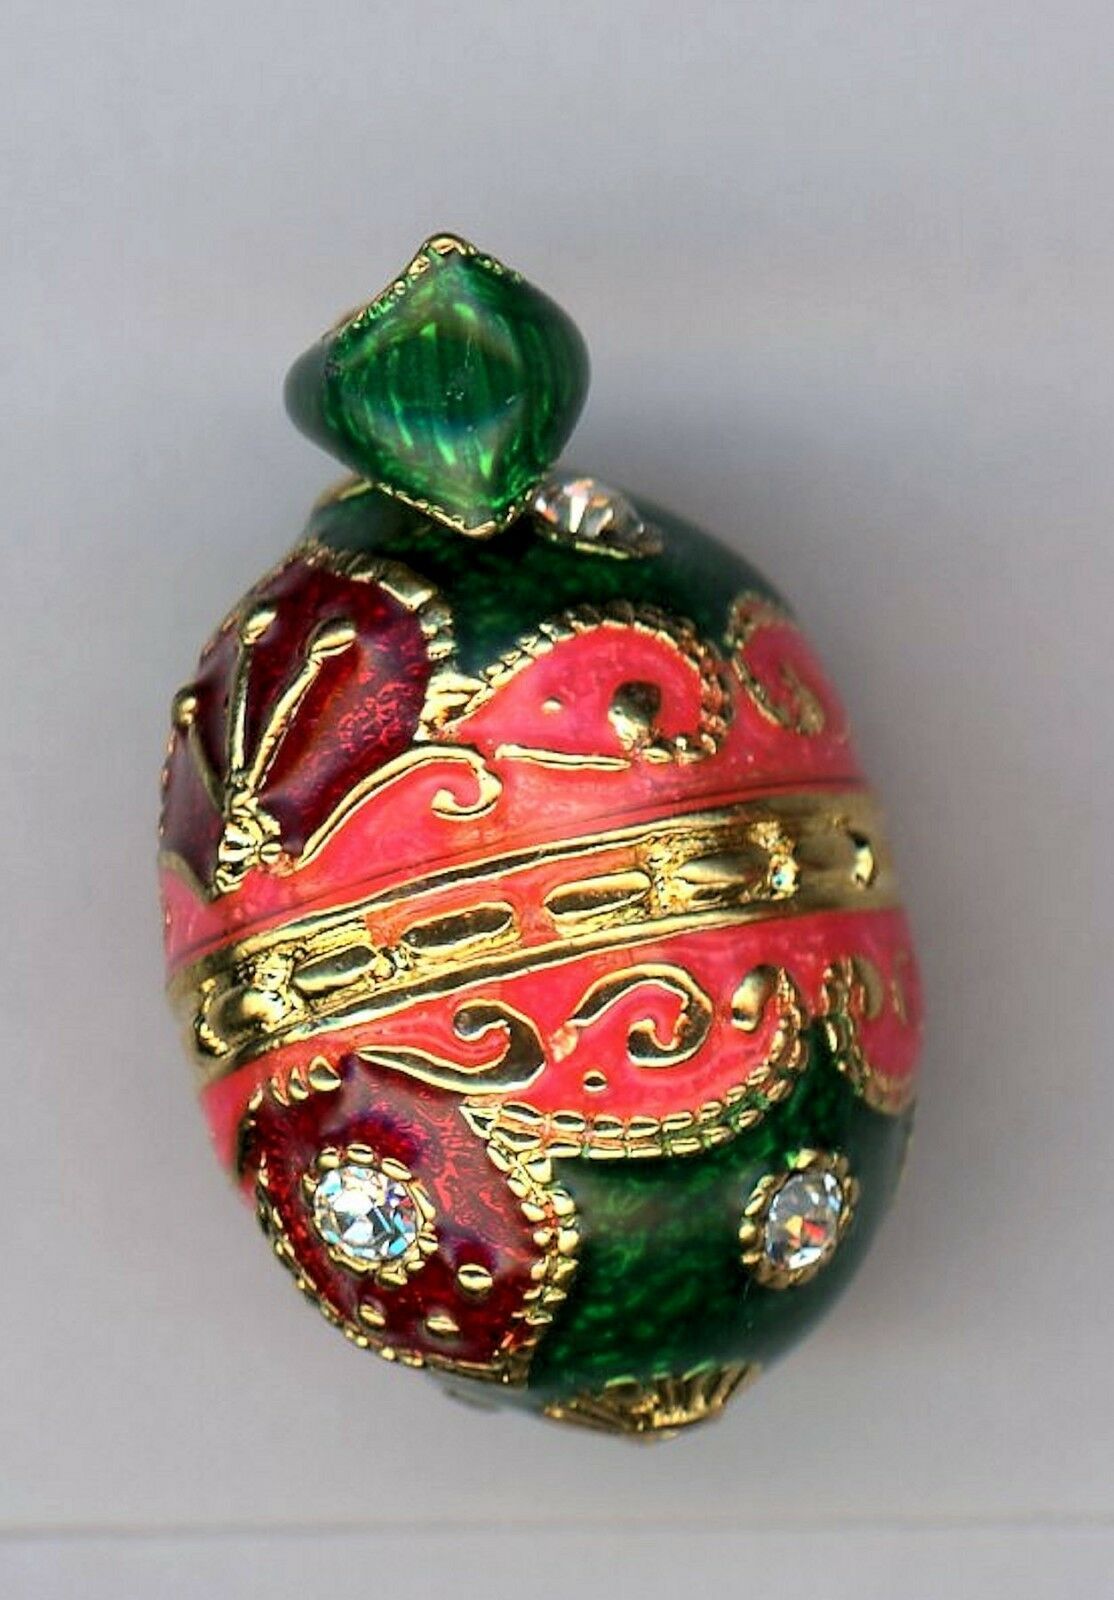 Primary image for Russian Faux Egg Pendant Split w/clear crystals,decor green, pink, gold & red